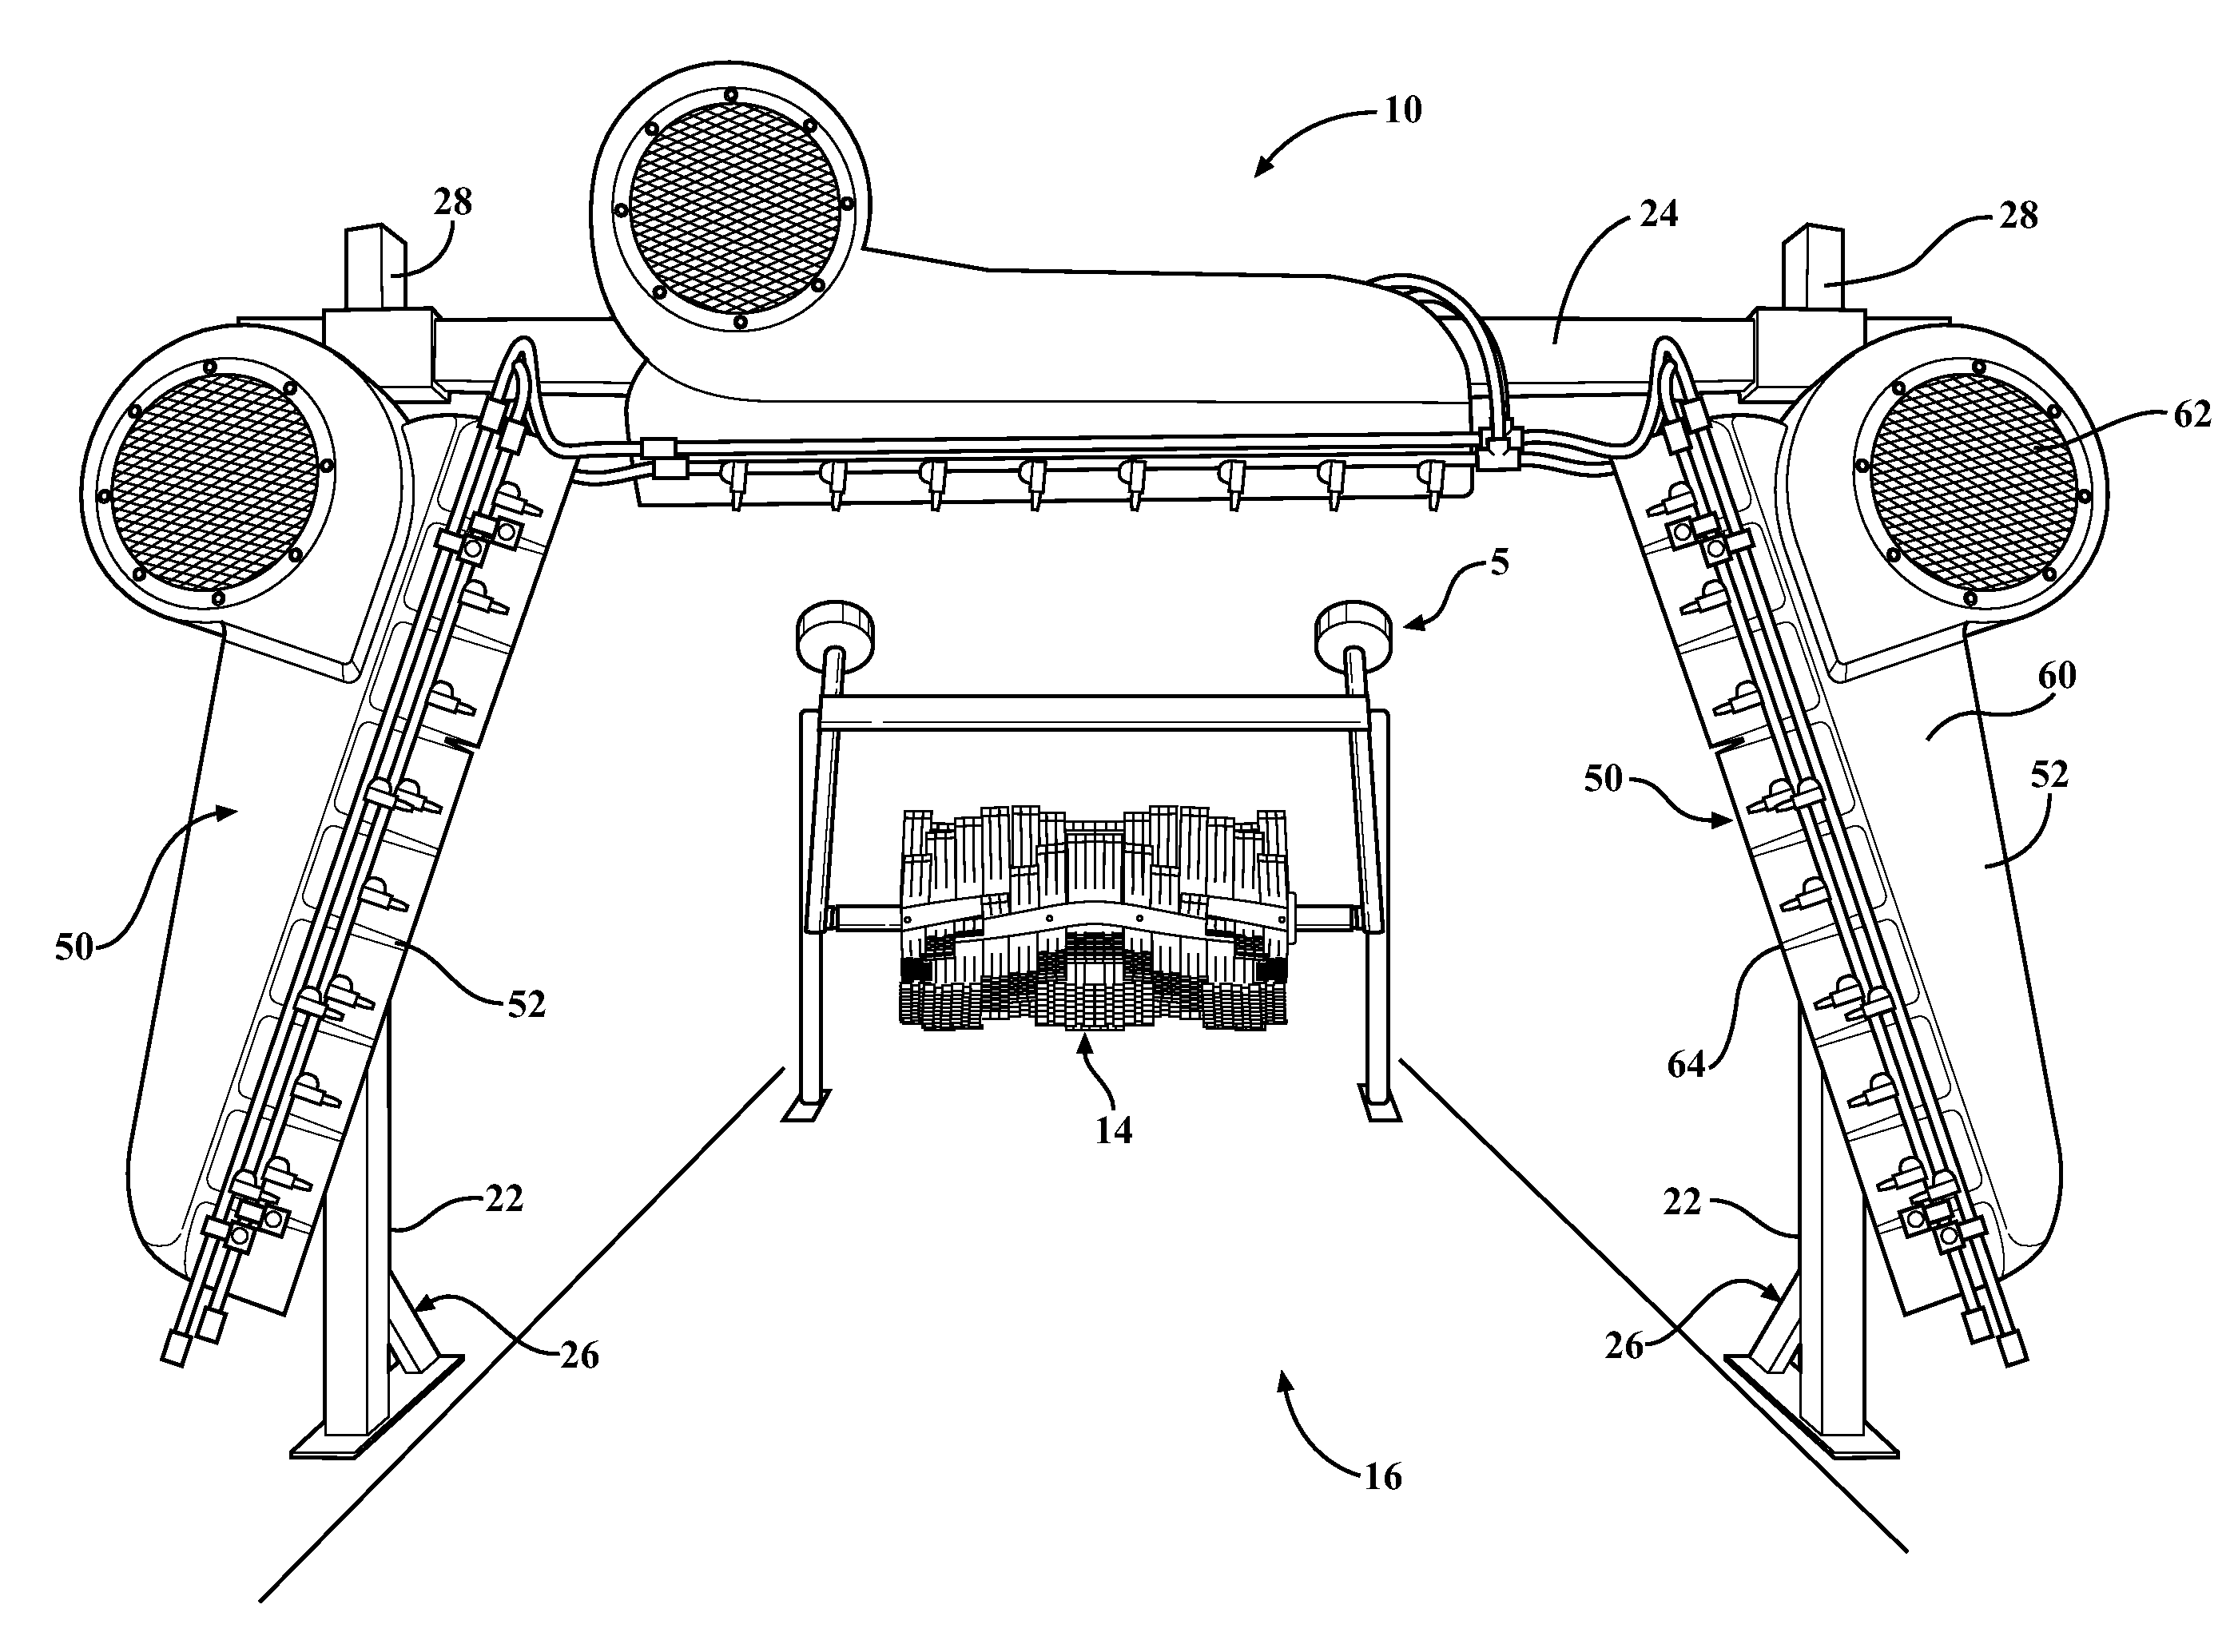 Vehicle treatment apparatus that emits air and water